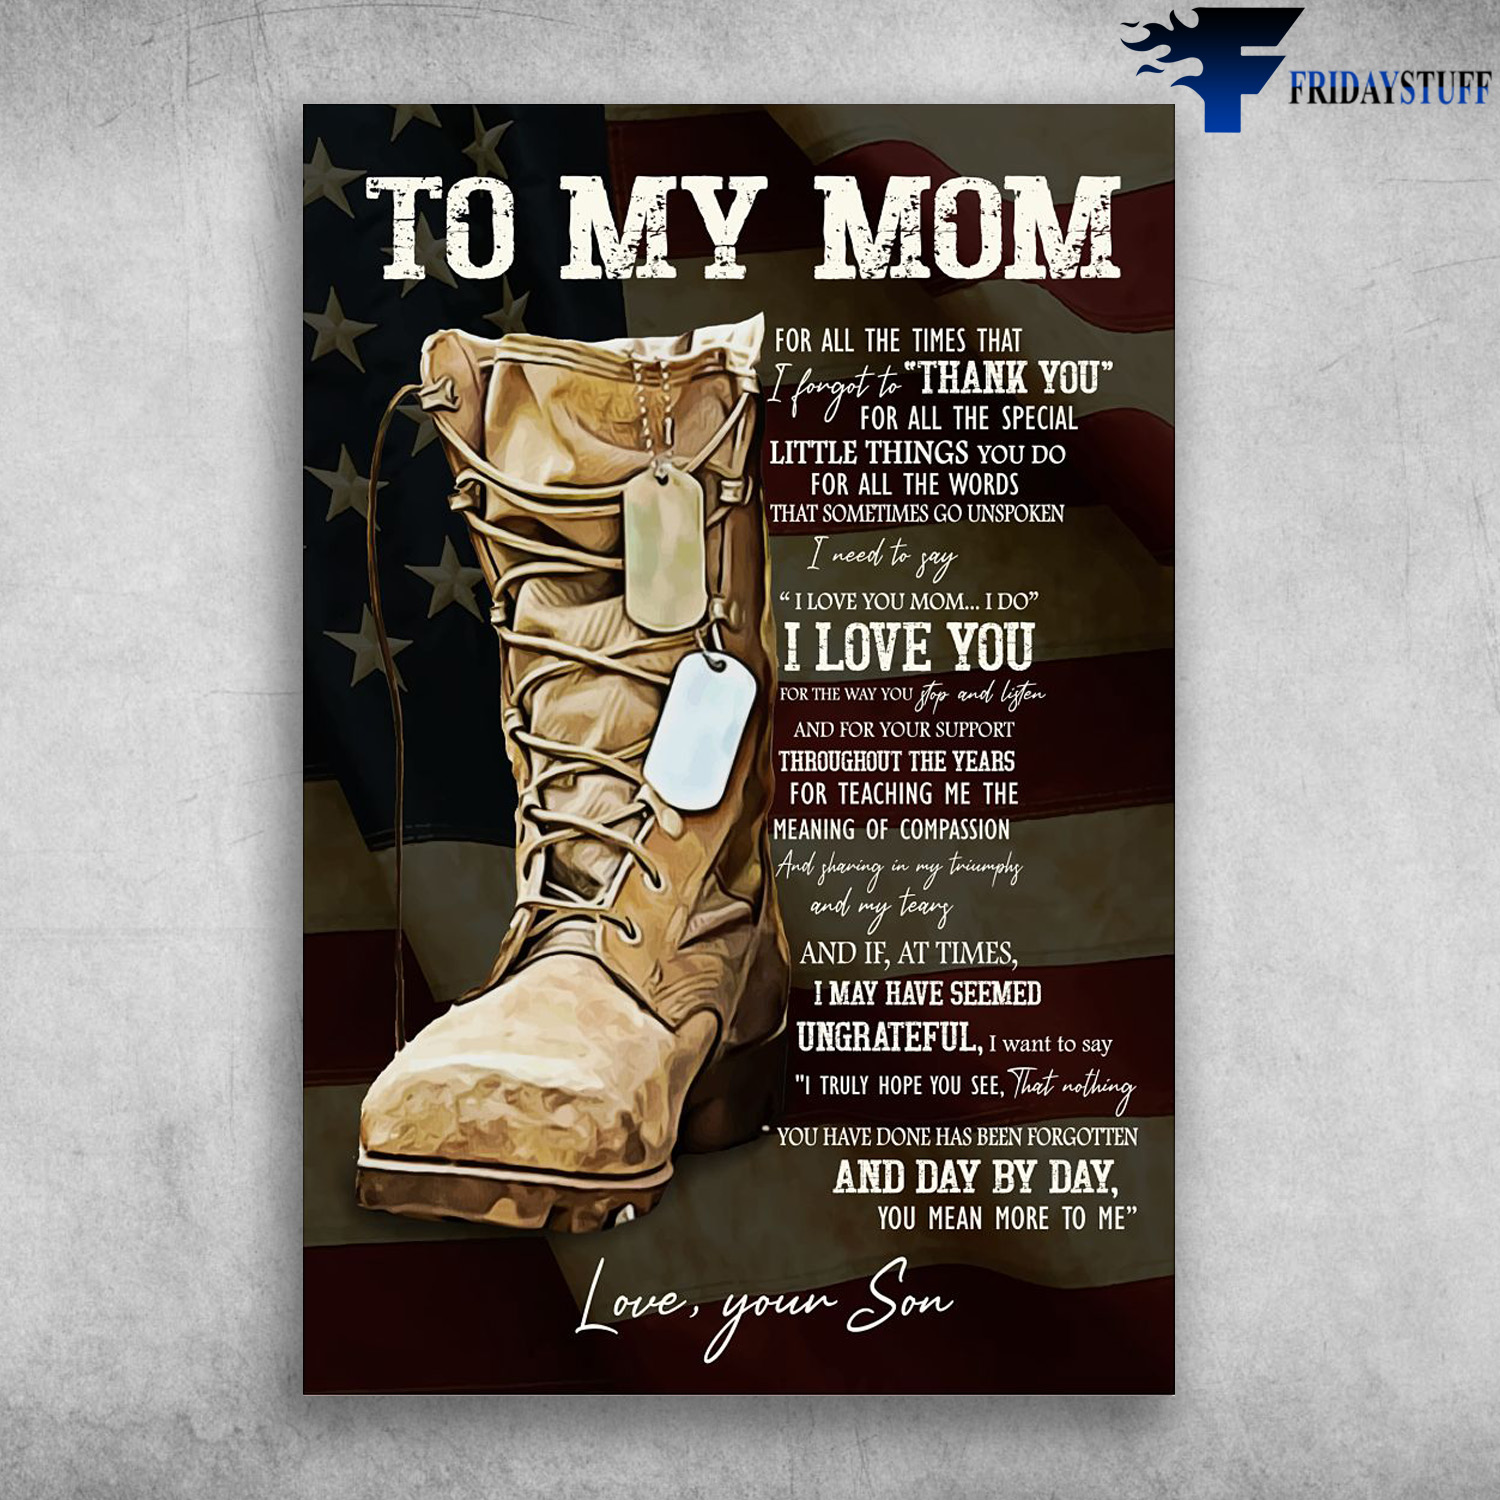 American Veteran Shoe - To My Mom, For All The Times That I Forgot To Thank You, For All The Special, Little Things You Do, For All The Words, That Sometimes Fo Unspoken, I Need To Say, I Love You, Your Son, 4th of July